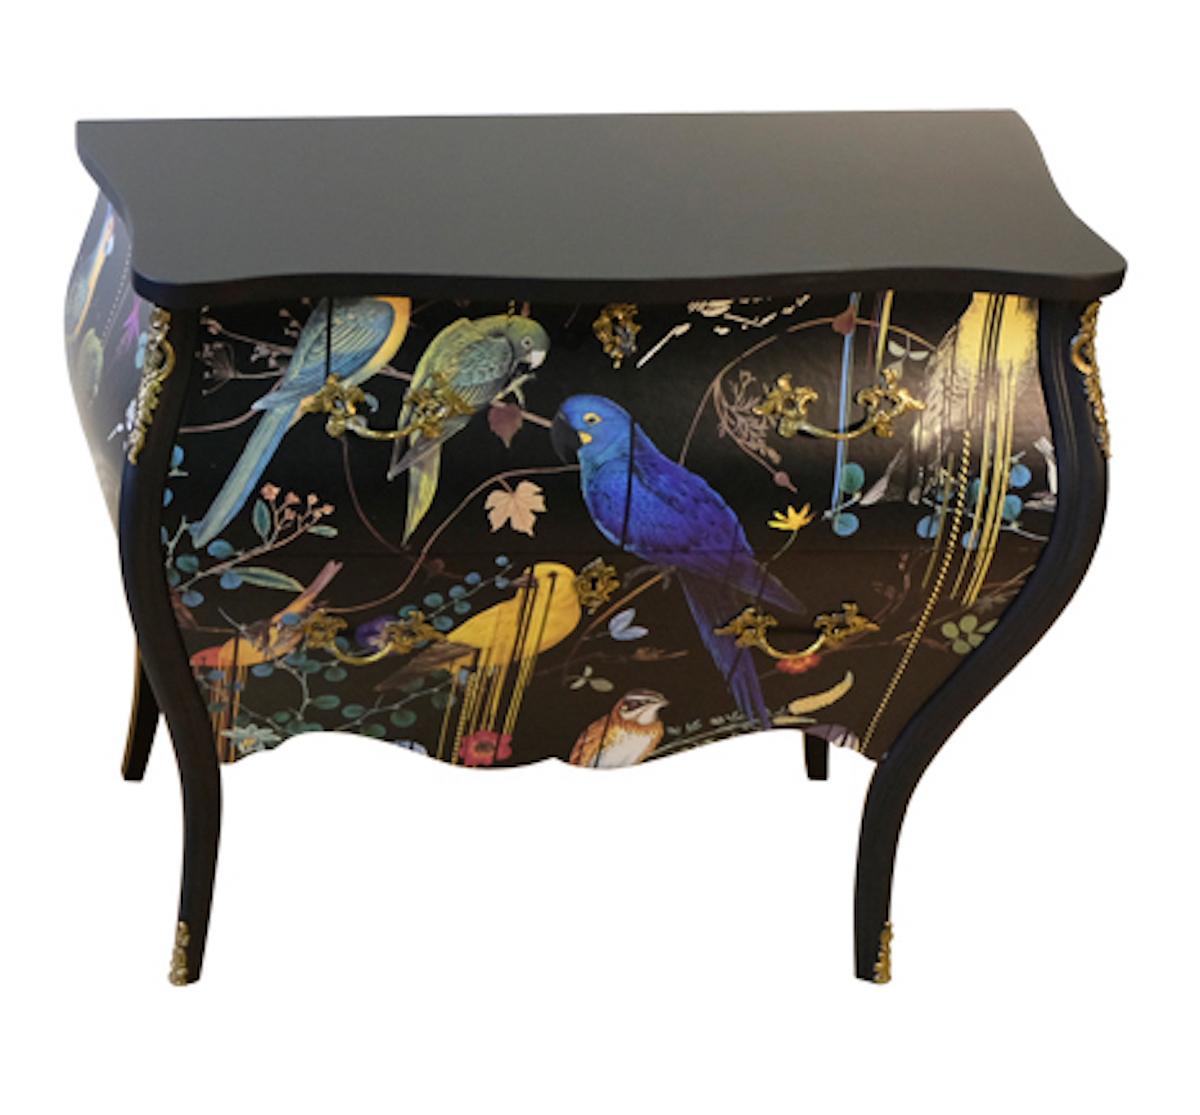 Rococo Chest/Commode with marble top
These chests dates from the early 1900's and have their orginal marble top and cast brass handles.
The chests has been restored and renovated to the highest standard with a Christian Lacroix black bords design to